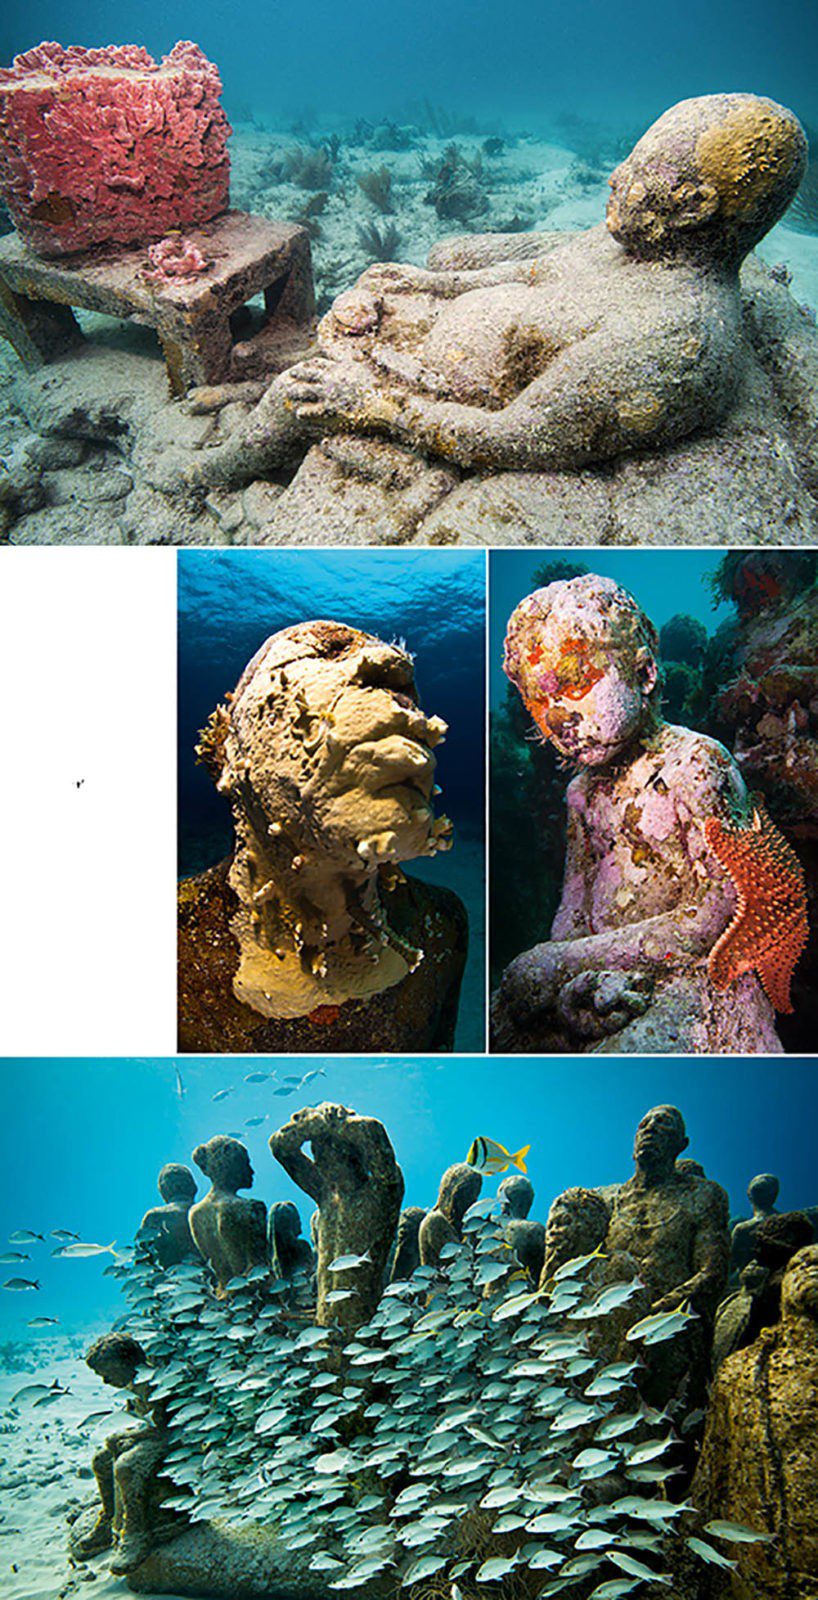 Mexico’s Underwater Museum was assembled off the coasts of Cancun and Isla Mujeres in 2009-2013. It includes The Silent Evolution, the largest underwater collection of art, with 450 life-size cement figures standing in the sand. Taylor used neutral-pH cement to encourage marine growth – as on the ‘TV set’ that formed part of Inertia, above. Local people are frequently used as models.